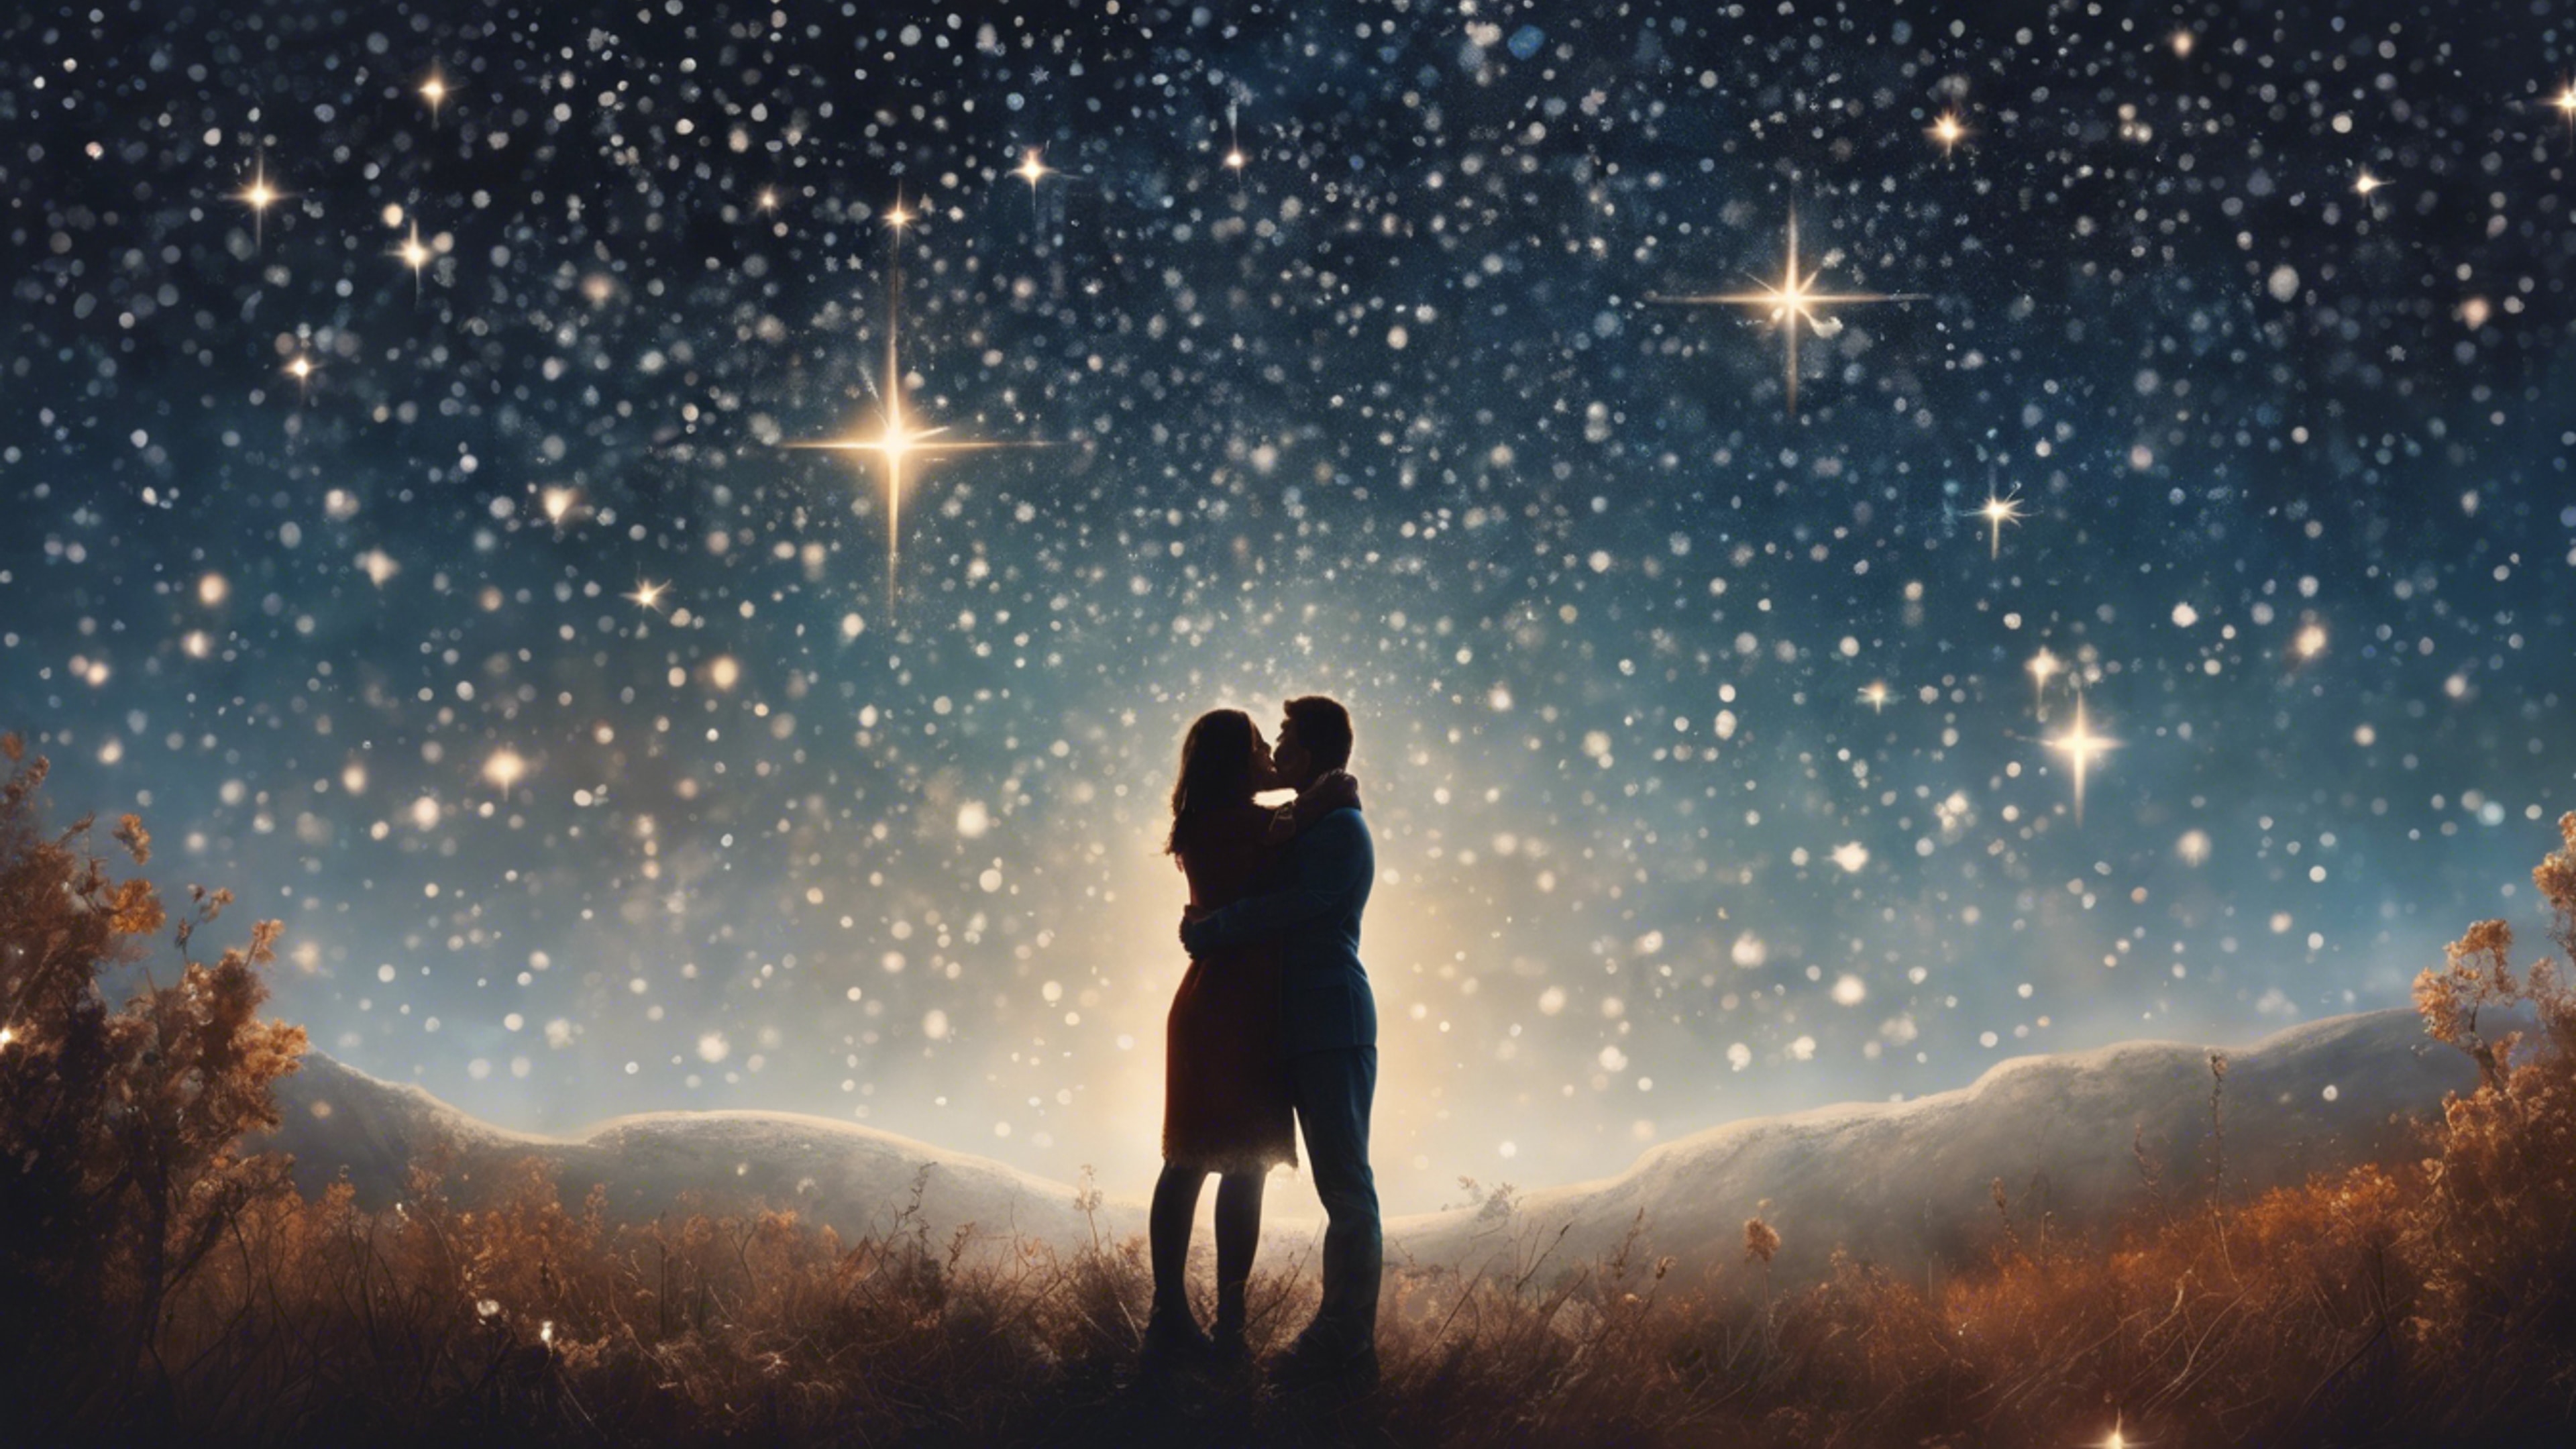 A timeless painting of a couple sharing a romantic moment under a star-filled sky. ورق الجدران[26fb6f637c3e4c759c8d]